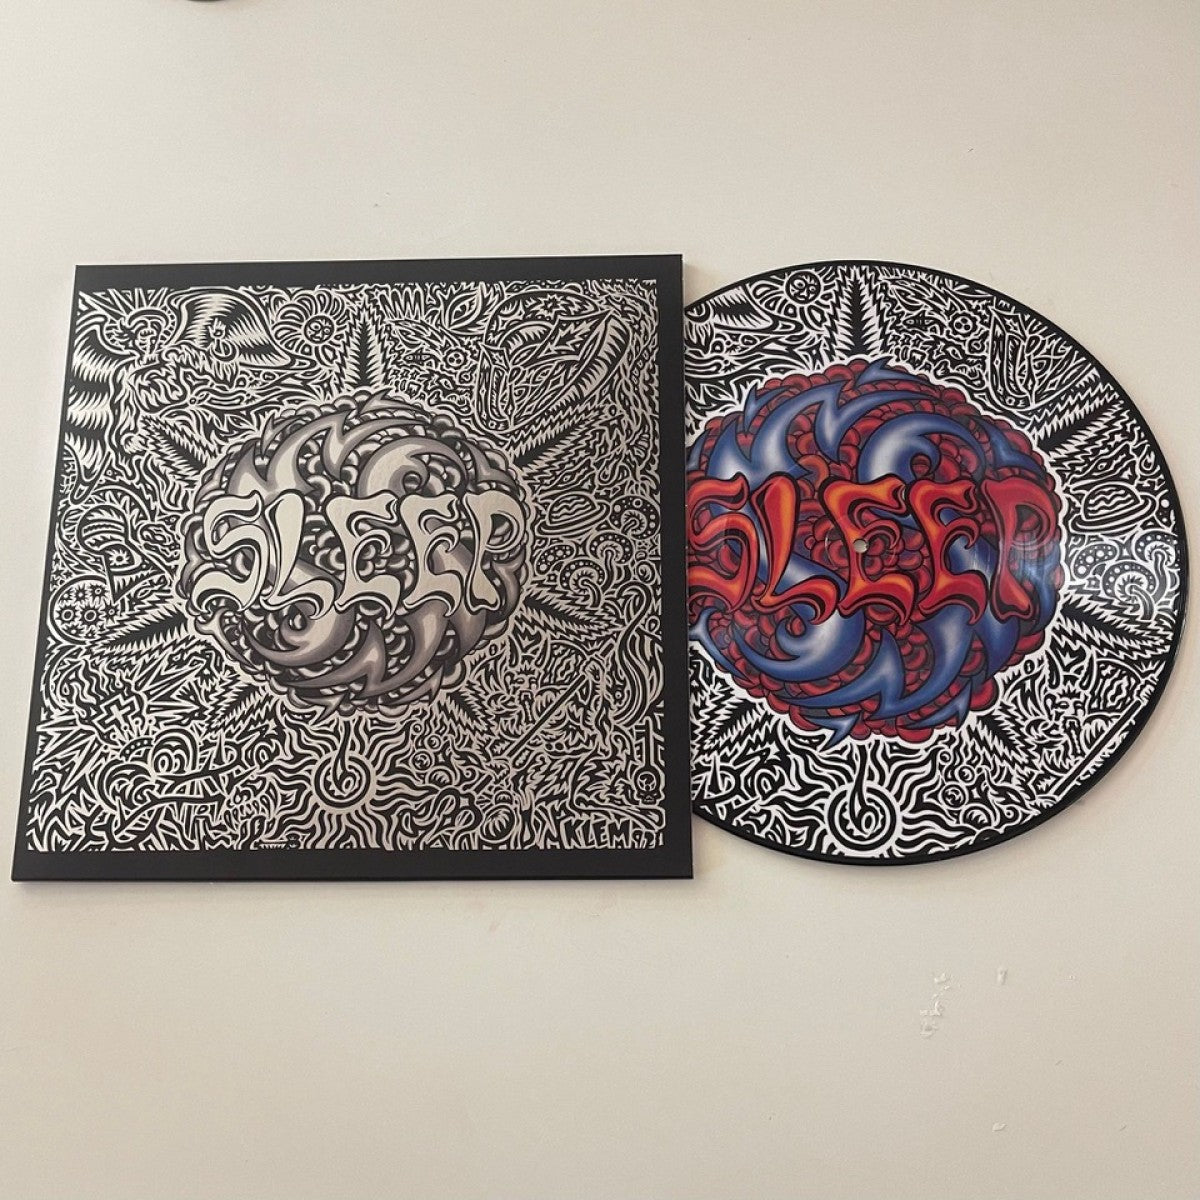 Sleep "Sleep's Holy Mountain" FDR Picture Disc Vinyl w/ Limited Mirrored Sleeve